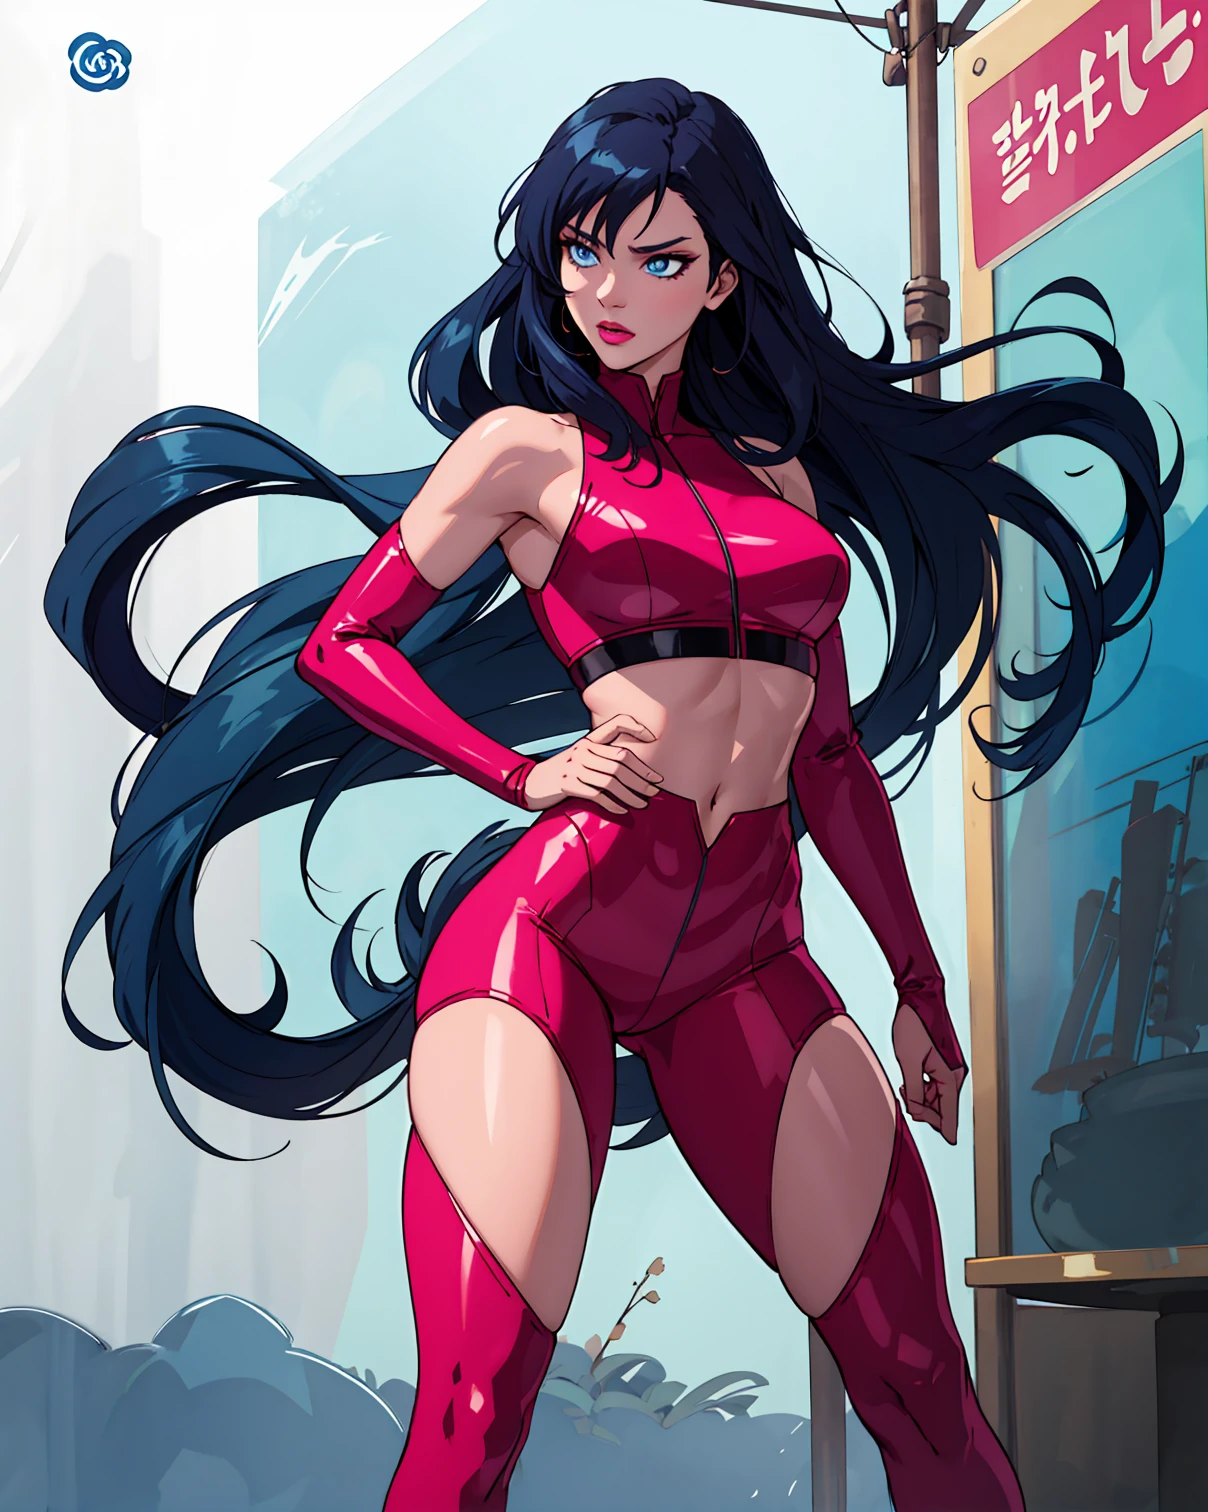 Front View. See her abdomen,Indigenous anime girl perfect body and got very bright skin and blue long hair with blue eyes, glossy lips, from japan, the image should be full-body, with her attire being the traditional meg suit in tight super bright pink color. The image should be from head to waist knees. ,she stand beside the ritual place. wearing two piece neon pink meg suit, with Japanese tattoos. Draw in style by Makoto Shinkai and Ilya Kushinov, trending on Displate. com, iridescent Poster,Side View. Indigenous anime girl perfect body and got very bright skin and blue long hair with blue eyes, glossy lips, from japan, the image should be full-body, with her attire being the traditional meg suit in tight super bright pink color. The image should be from head to waist knees. ,she stand beside the ritual place. wearing two piece neon pink meg suit, with Japanese tattoos. Draw in style by Makoto Shinkai and Ilya Kushinov, trending on Displate. com, iridescent Poster